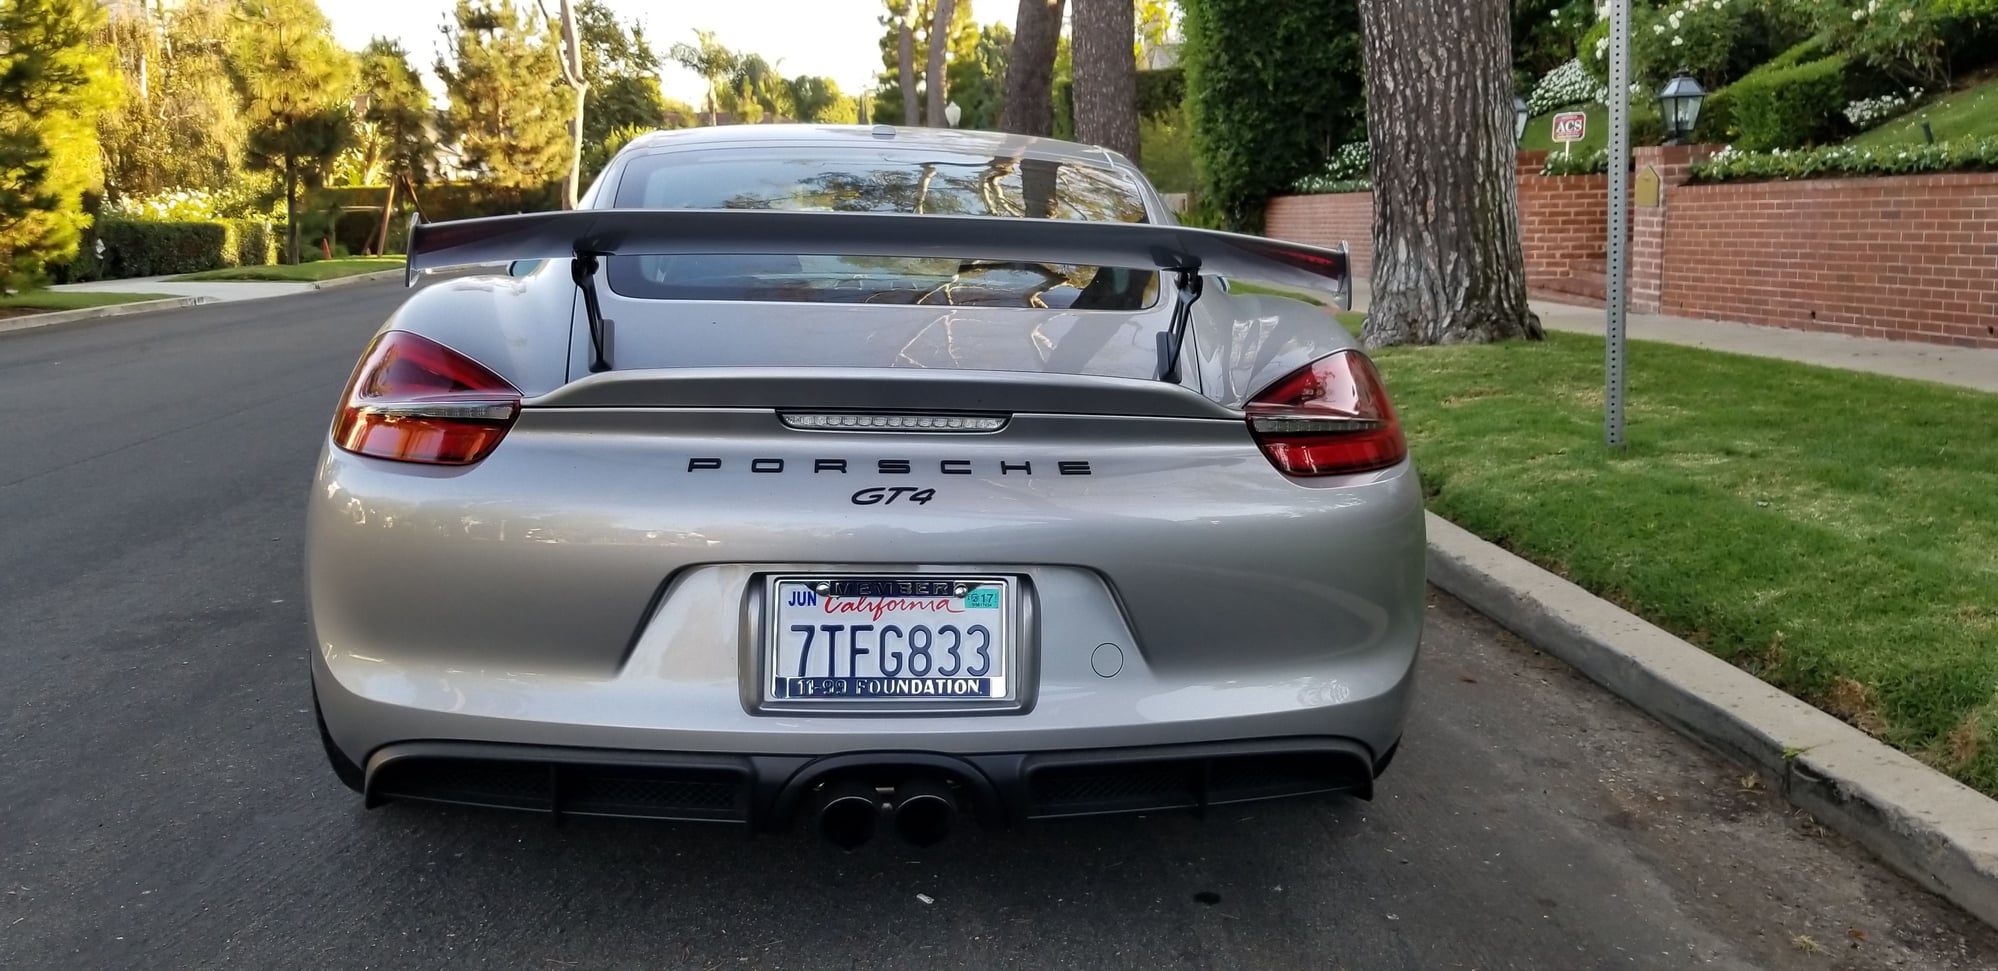 2016 Porsche Cayman GT4 - 2016 Porsche GT4 - 743 Miles, MINT Condition, GT Silver, LWBs - Used - VIN WP0AC2A80GK191932 - 743 Miles - 6 cyl - 2WD - Manual - Coupe - Silver - Los Angeles, CA 90049, United States